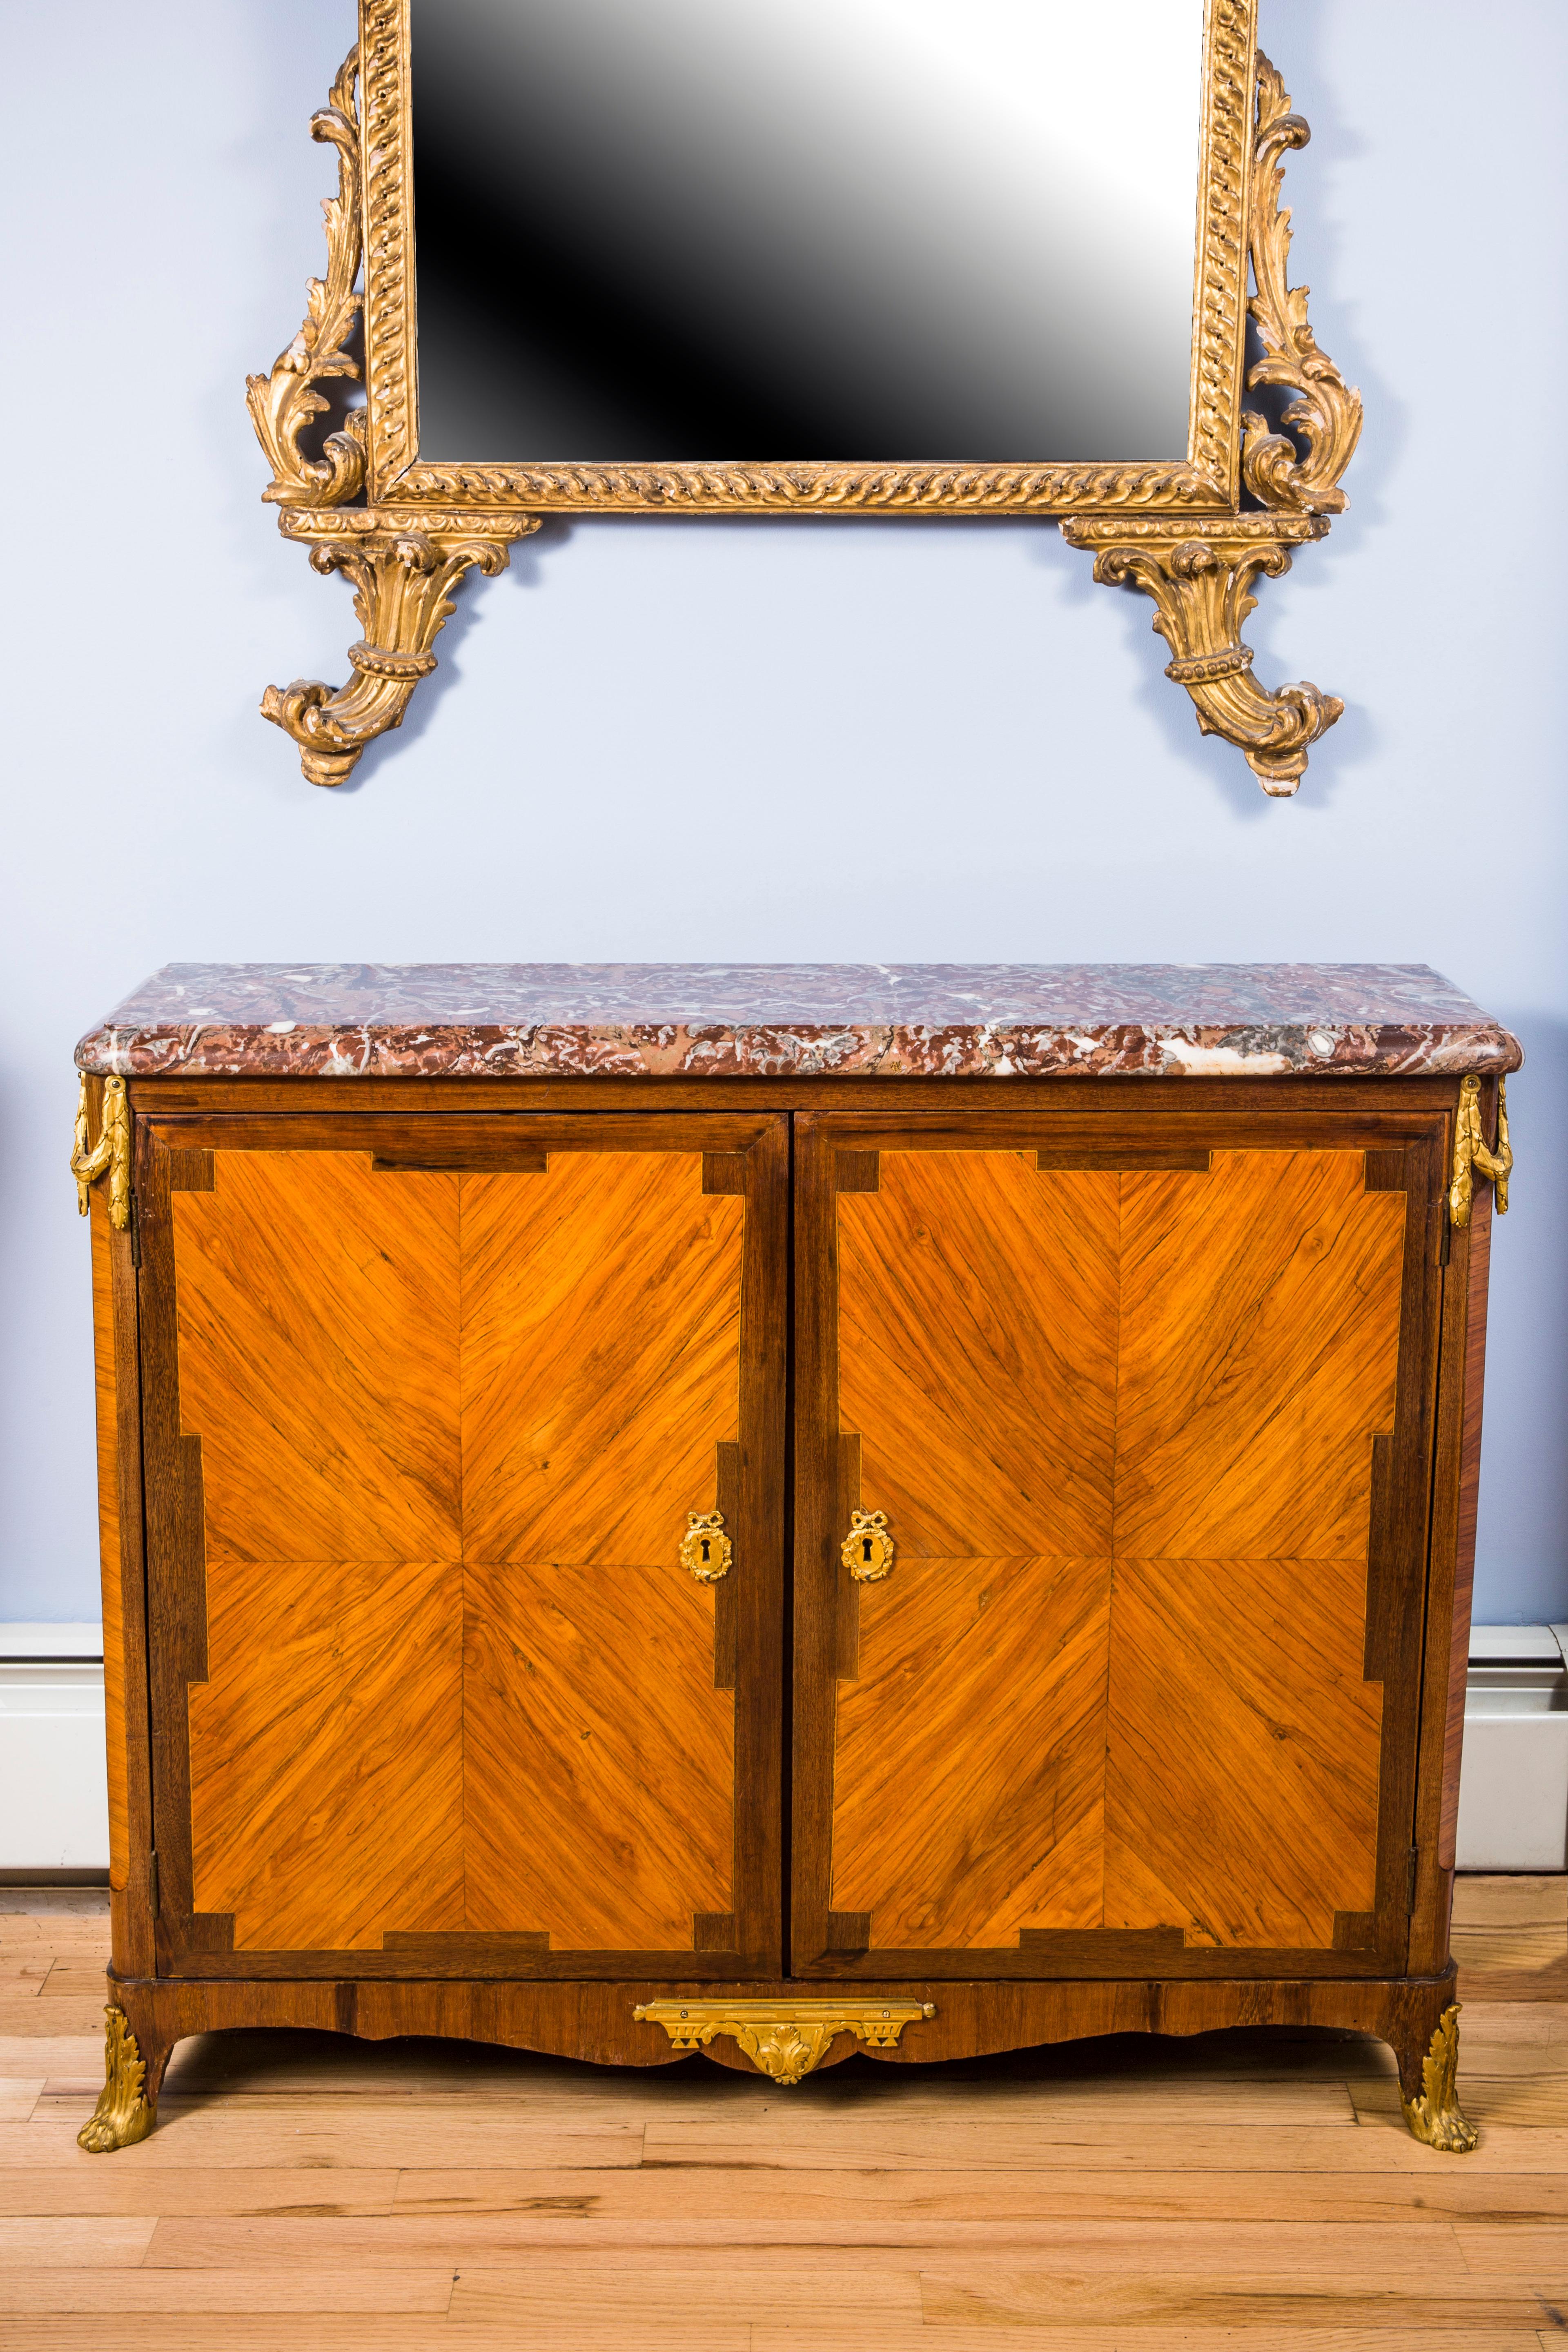 Gilt Bronze Mounted Cabinet with Marble Top by Pierre Roussel, Paris, circa 1745 In Good Condition For Sale In New York, NY